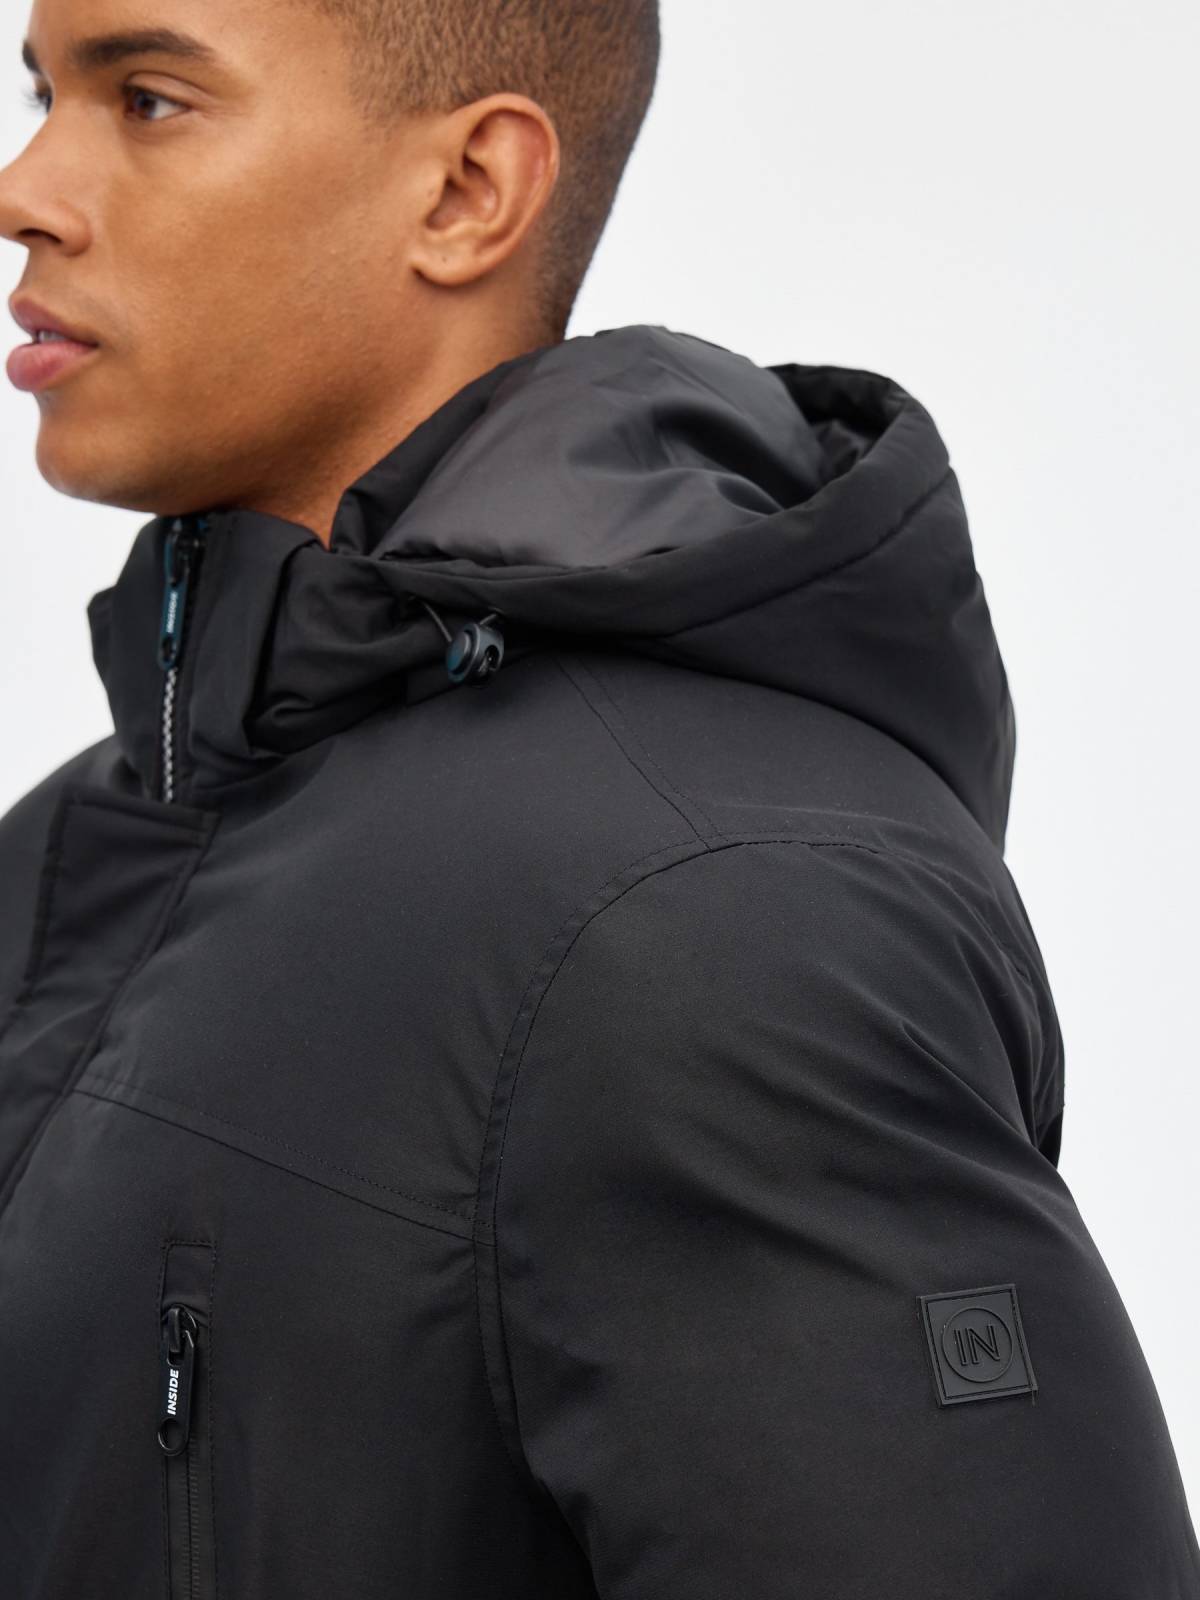 Hooded parka black detail view